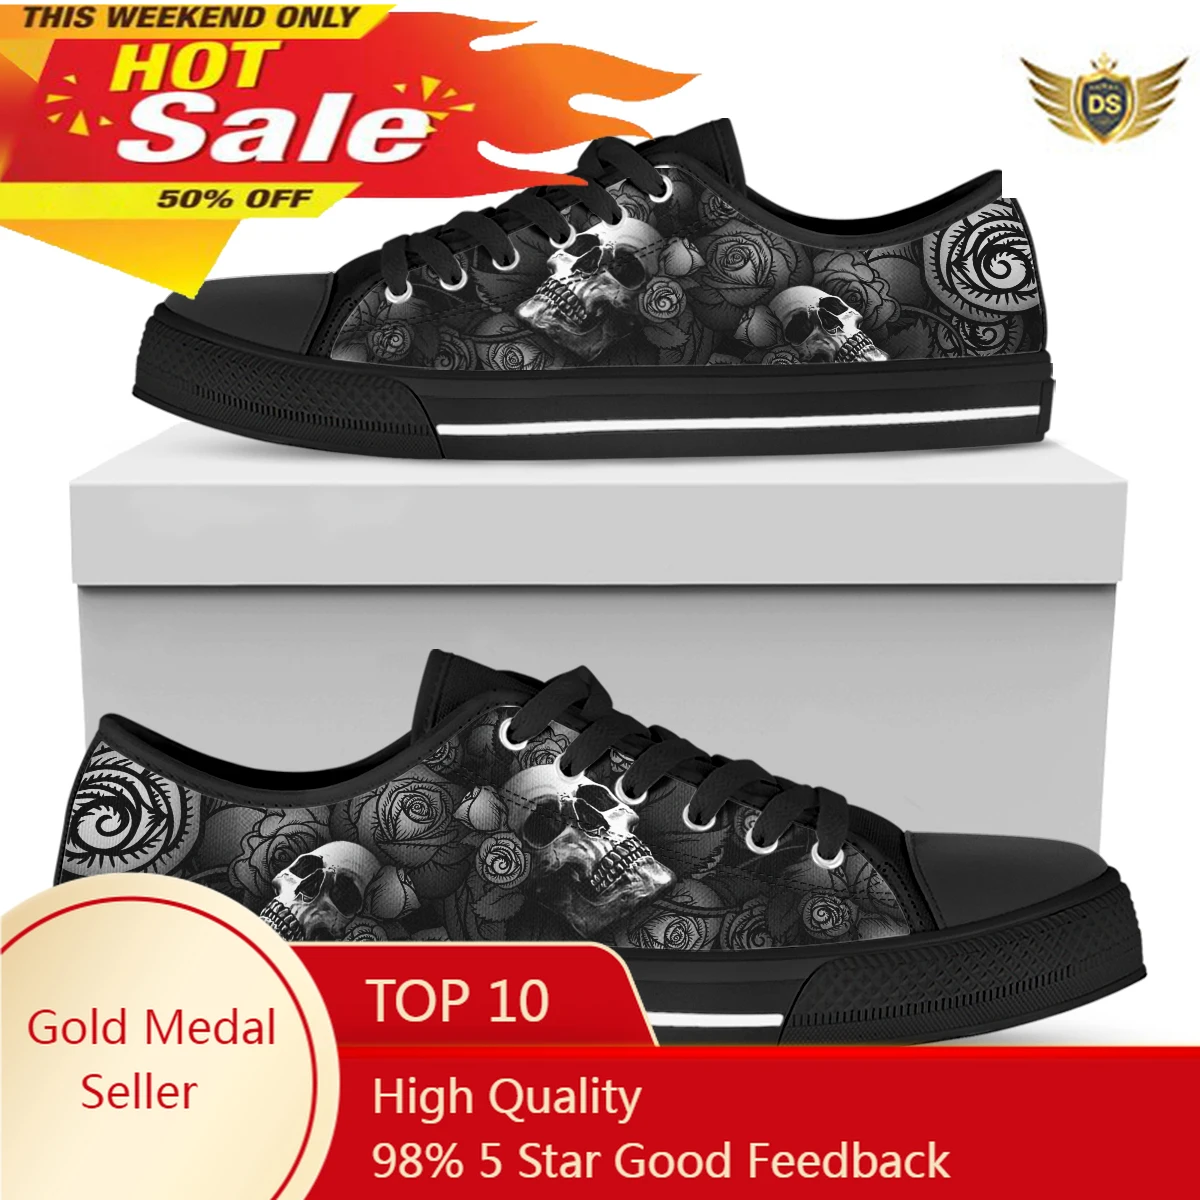 Retro Rose Skull Grey Autumn Women's Shoes Trend Fashion Female Low-Top Flats Shoes Women Sneakers Casual Shoes spring autumn new women flats shoes fashion sneakers shoes woman leathers espadrilles low cut lace up casual zapatos de mujer